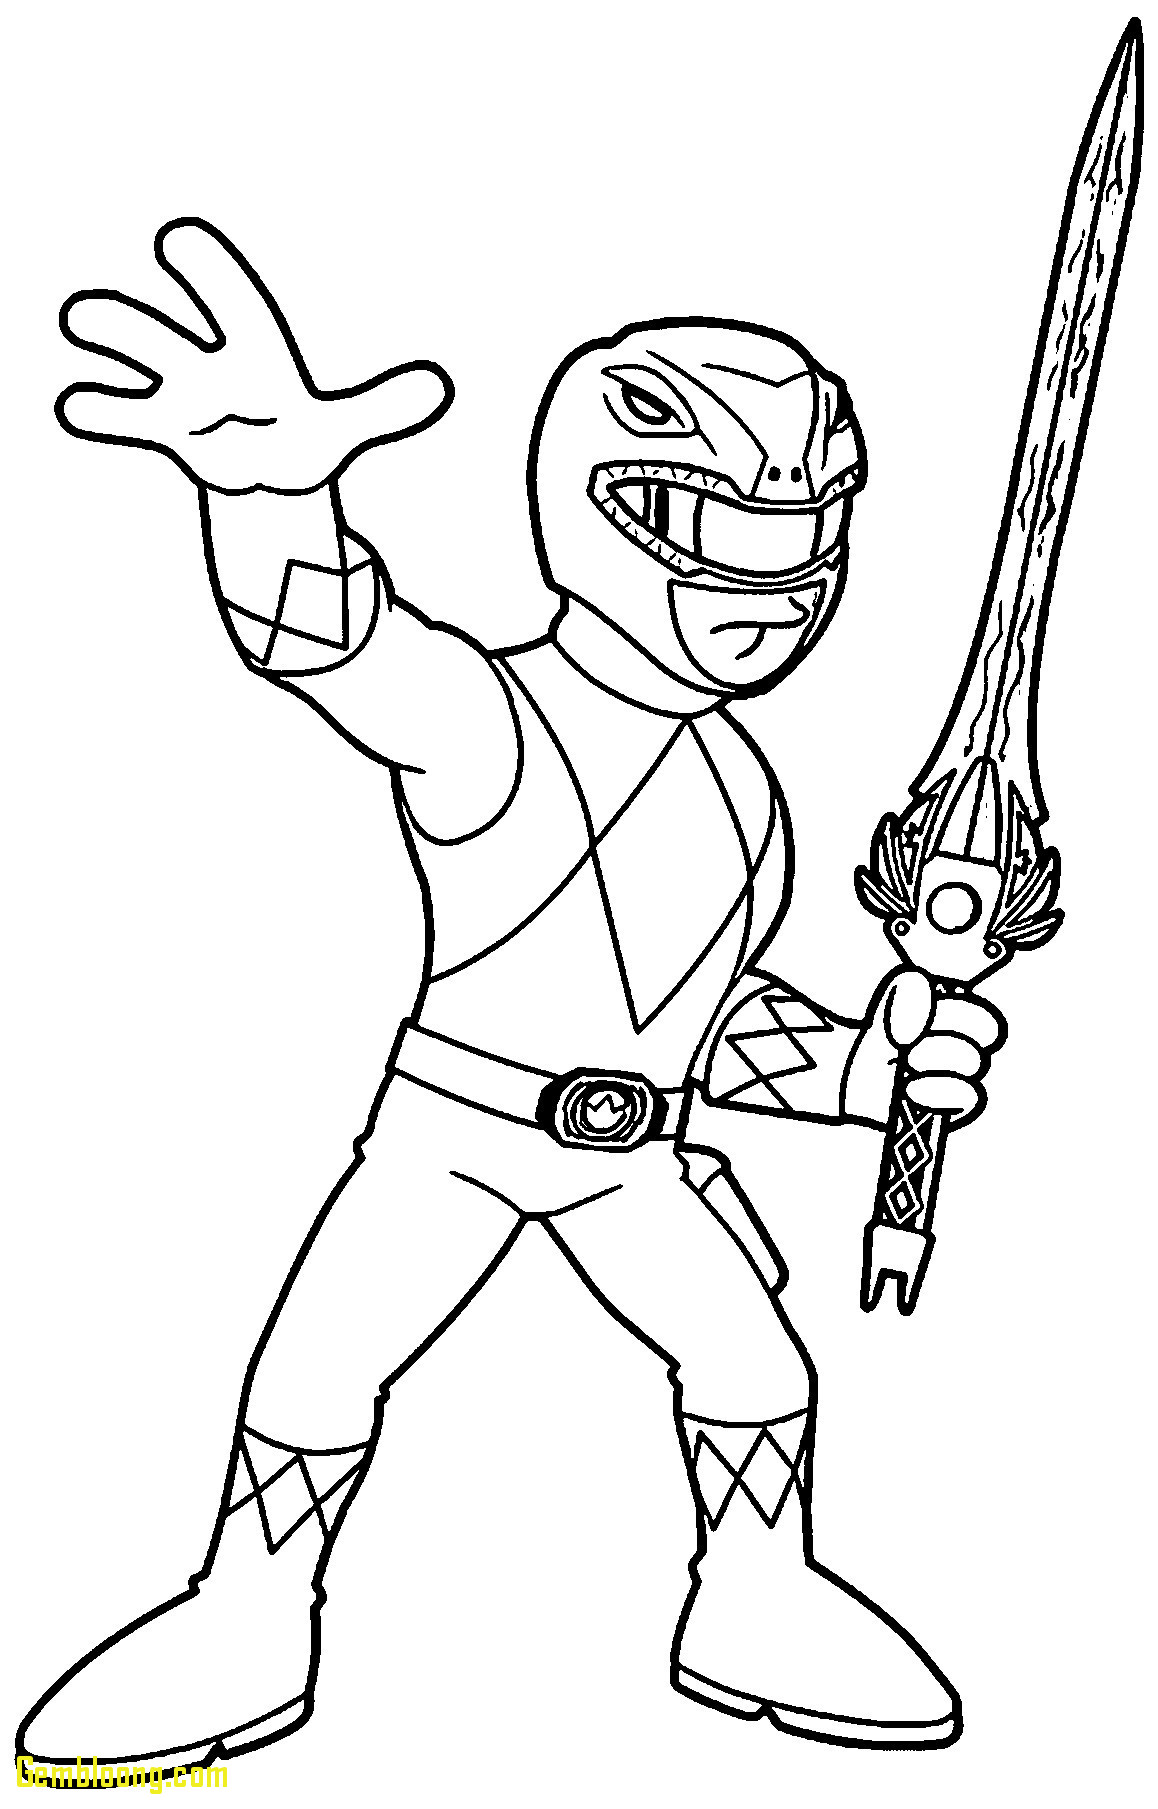 Coloring Pages : Power Rangeroring Pages For Kids Of Rangers ...